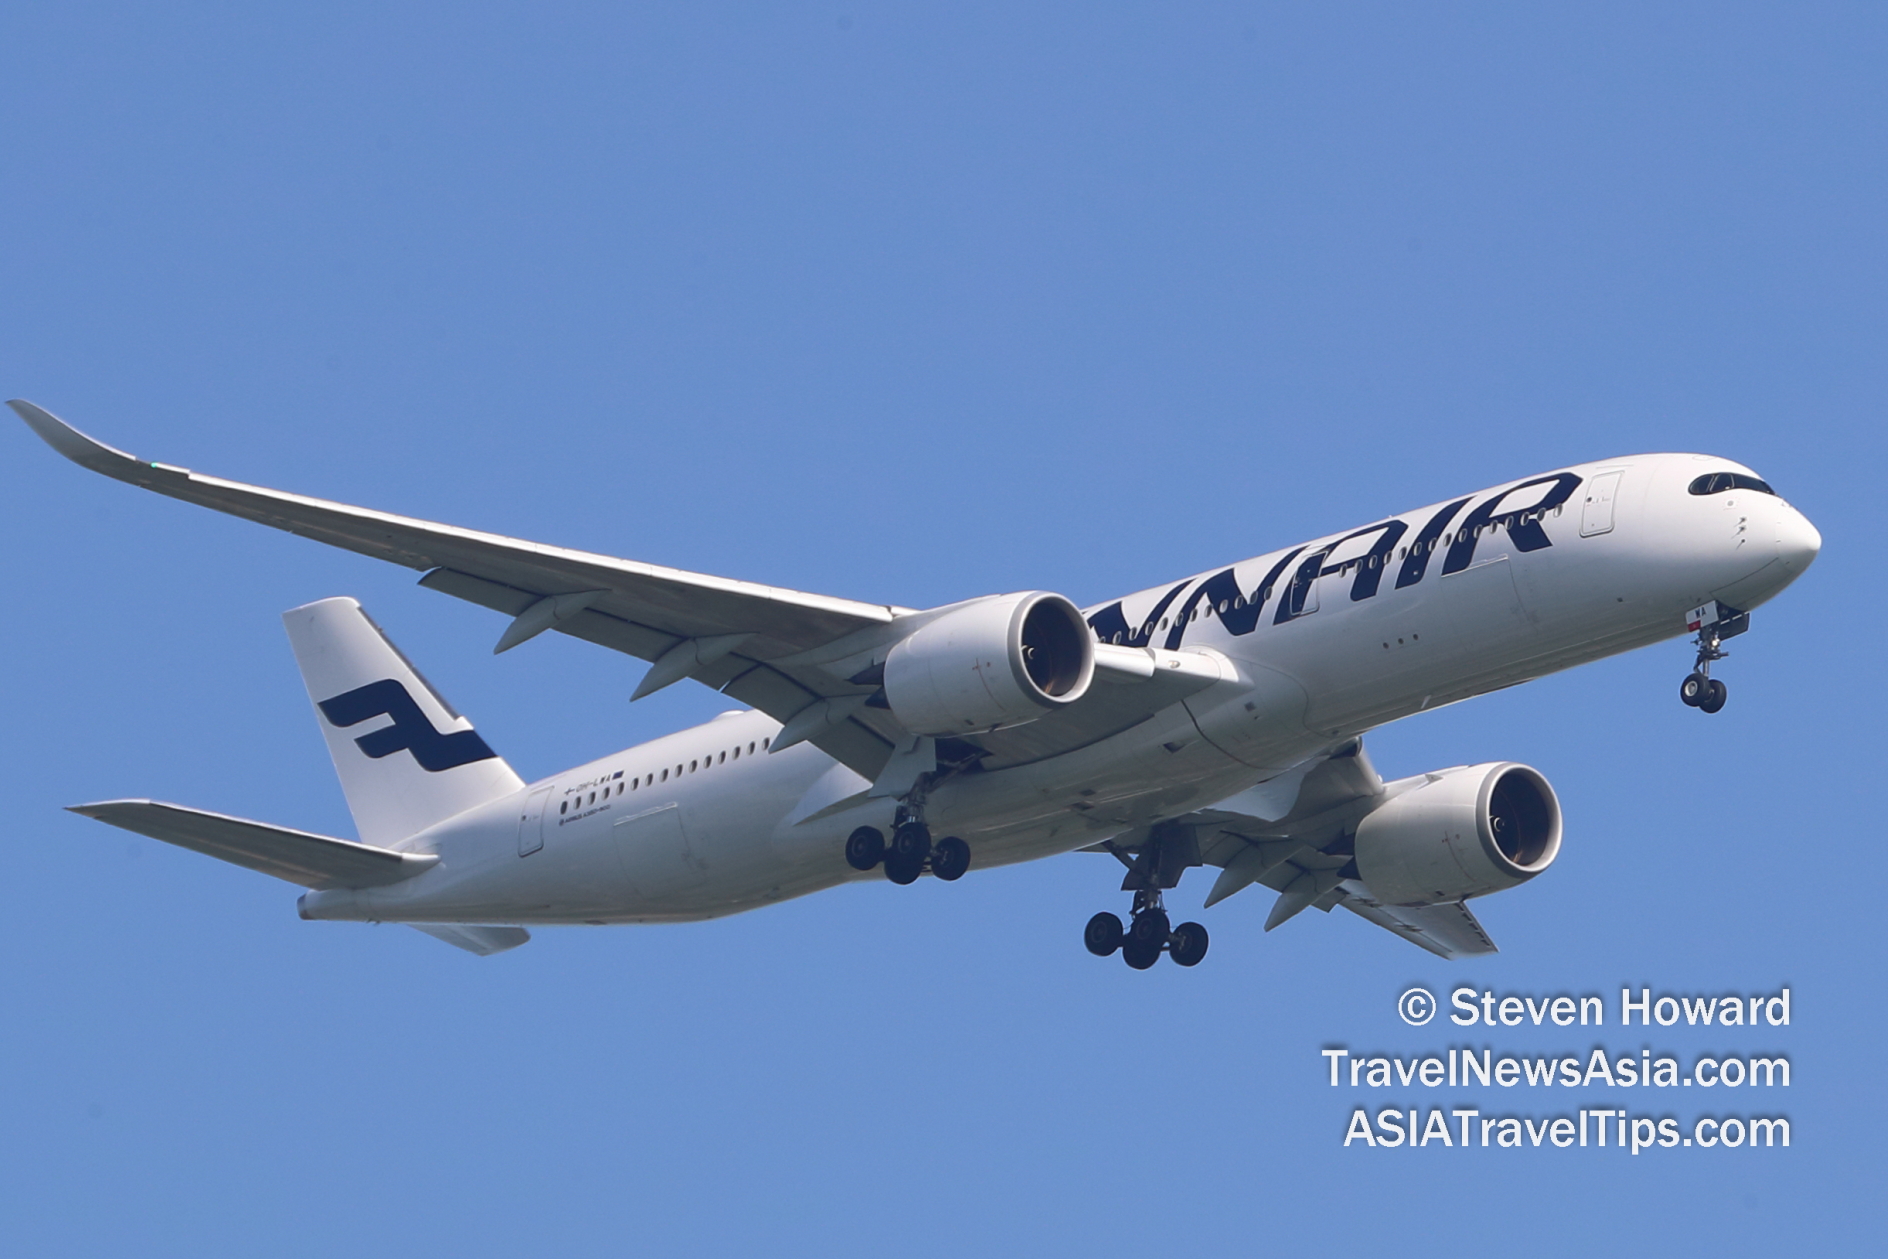 Finnair A350-900 reg: OH-LWA. Picture by Steven Howard of TravelNewsAsia.com Click to enlarge.